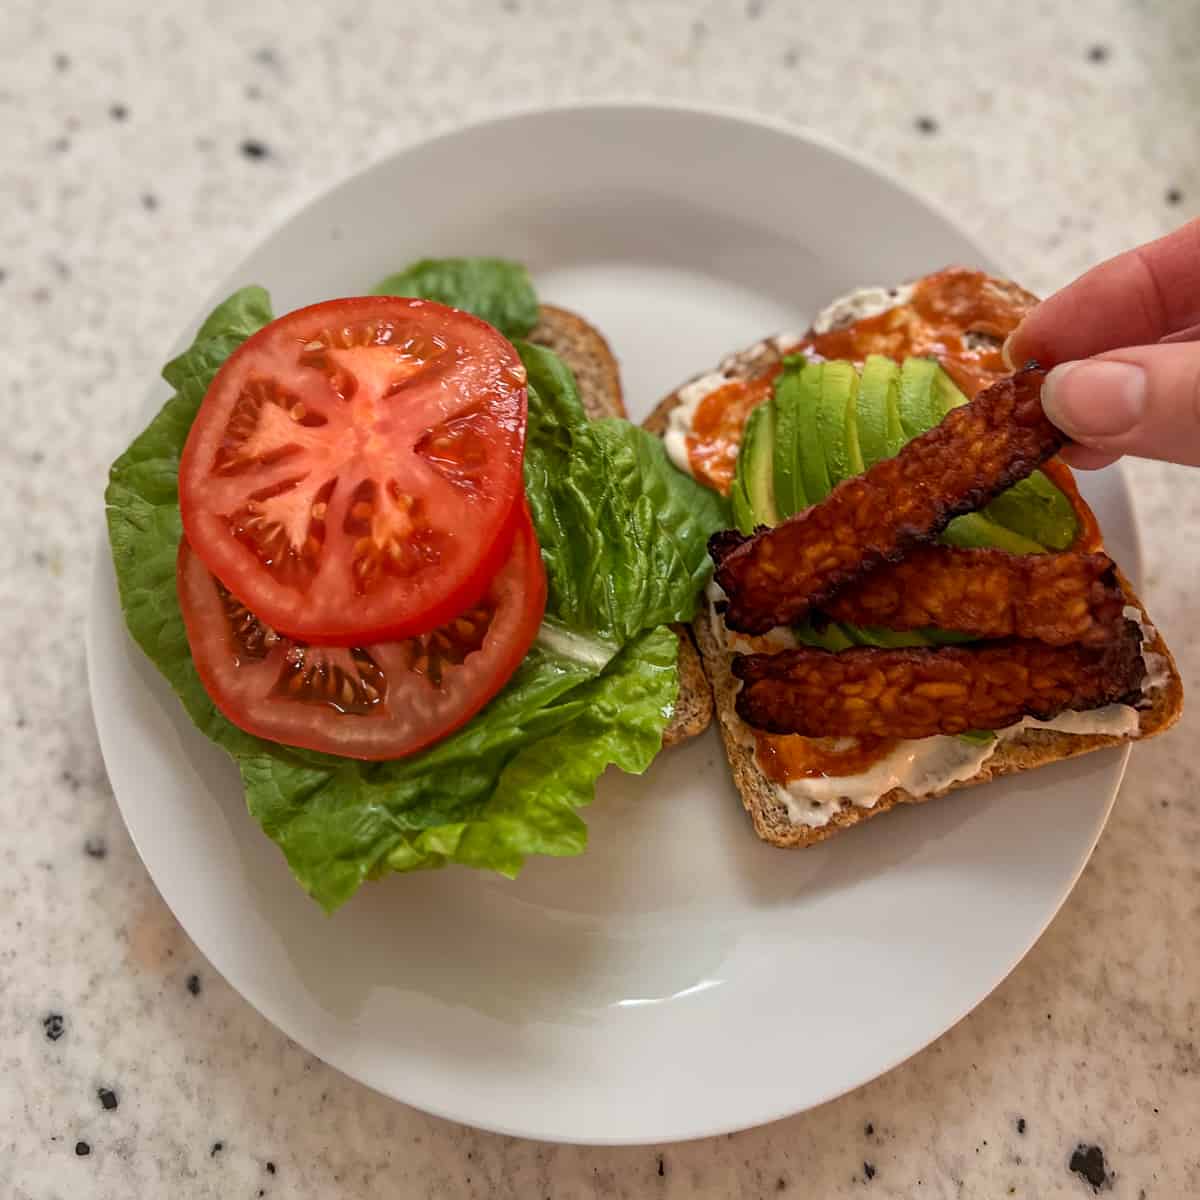 A woman's hand putting a slice of tempeh bacon on the sandwich.